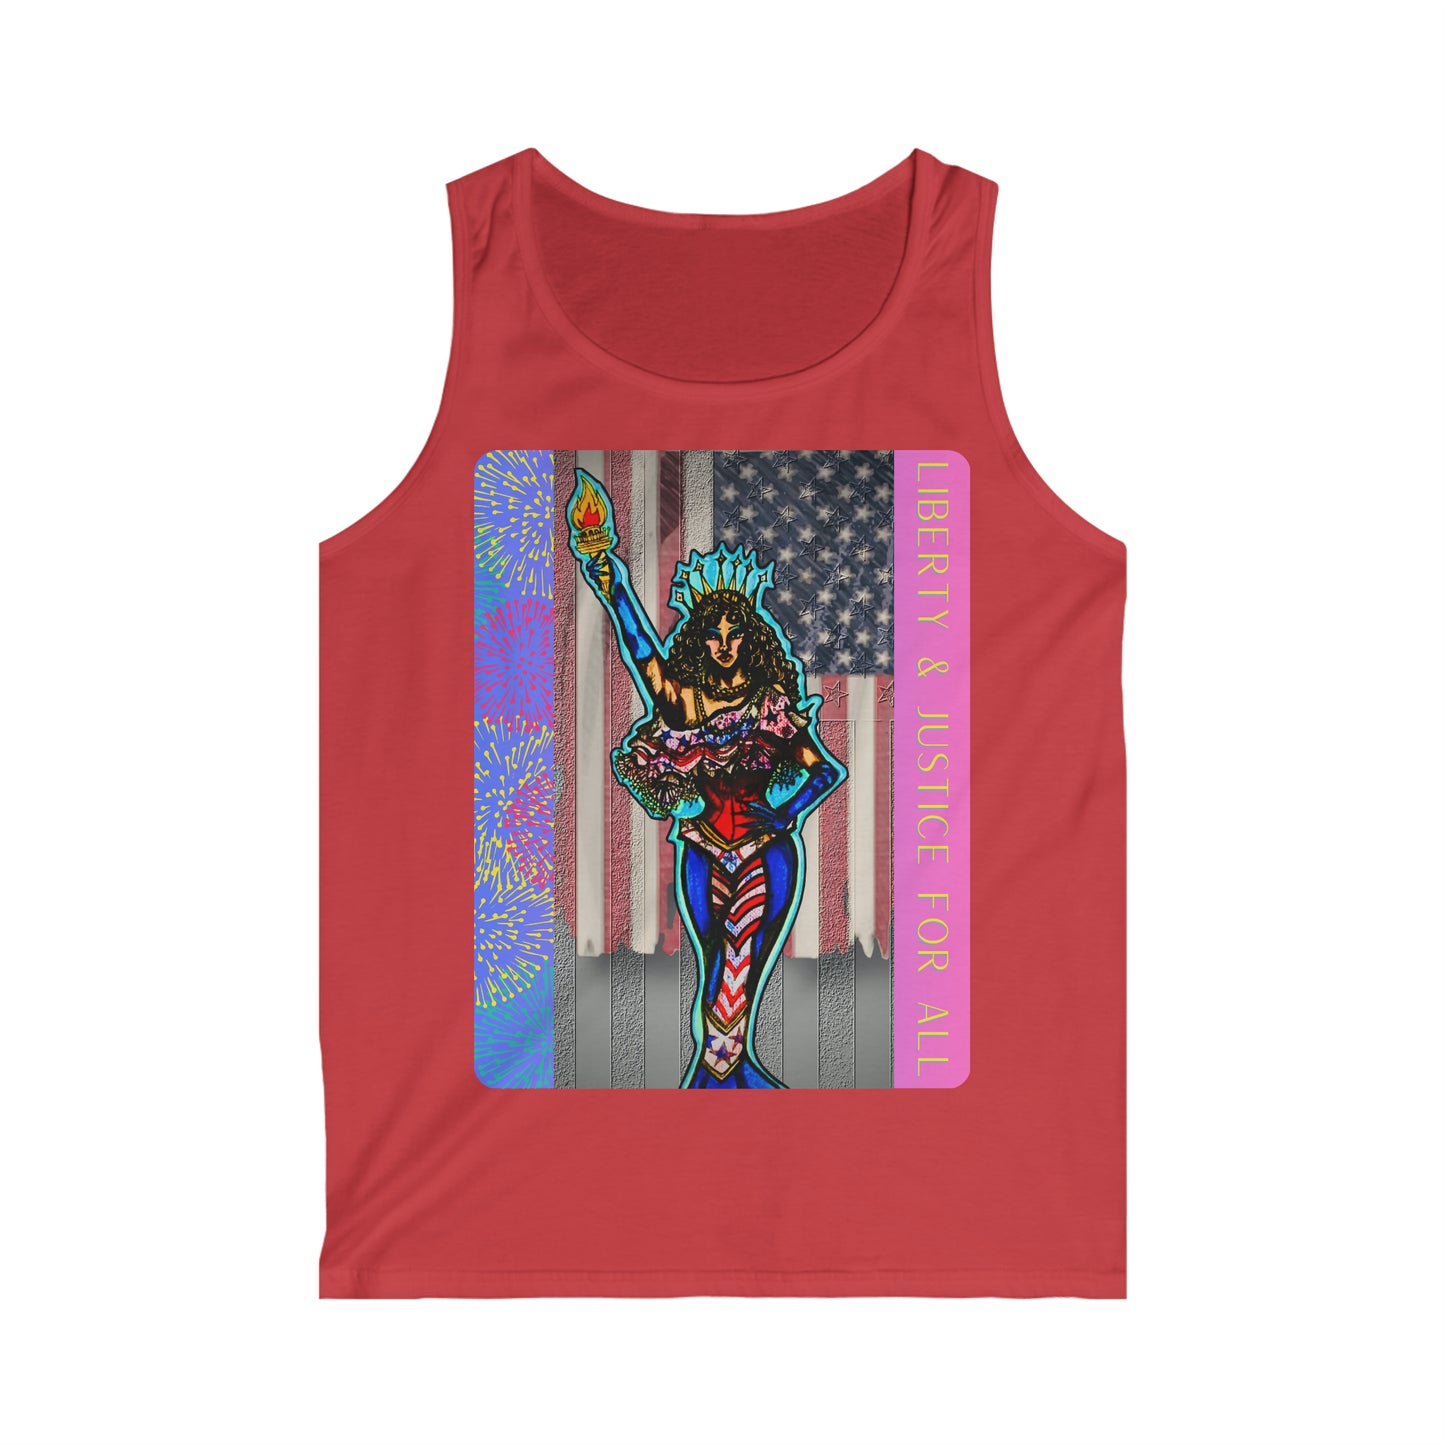 Liberty and Justice For All Men's Softstyle Tank Top